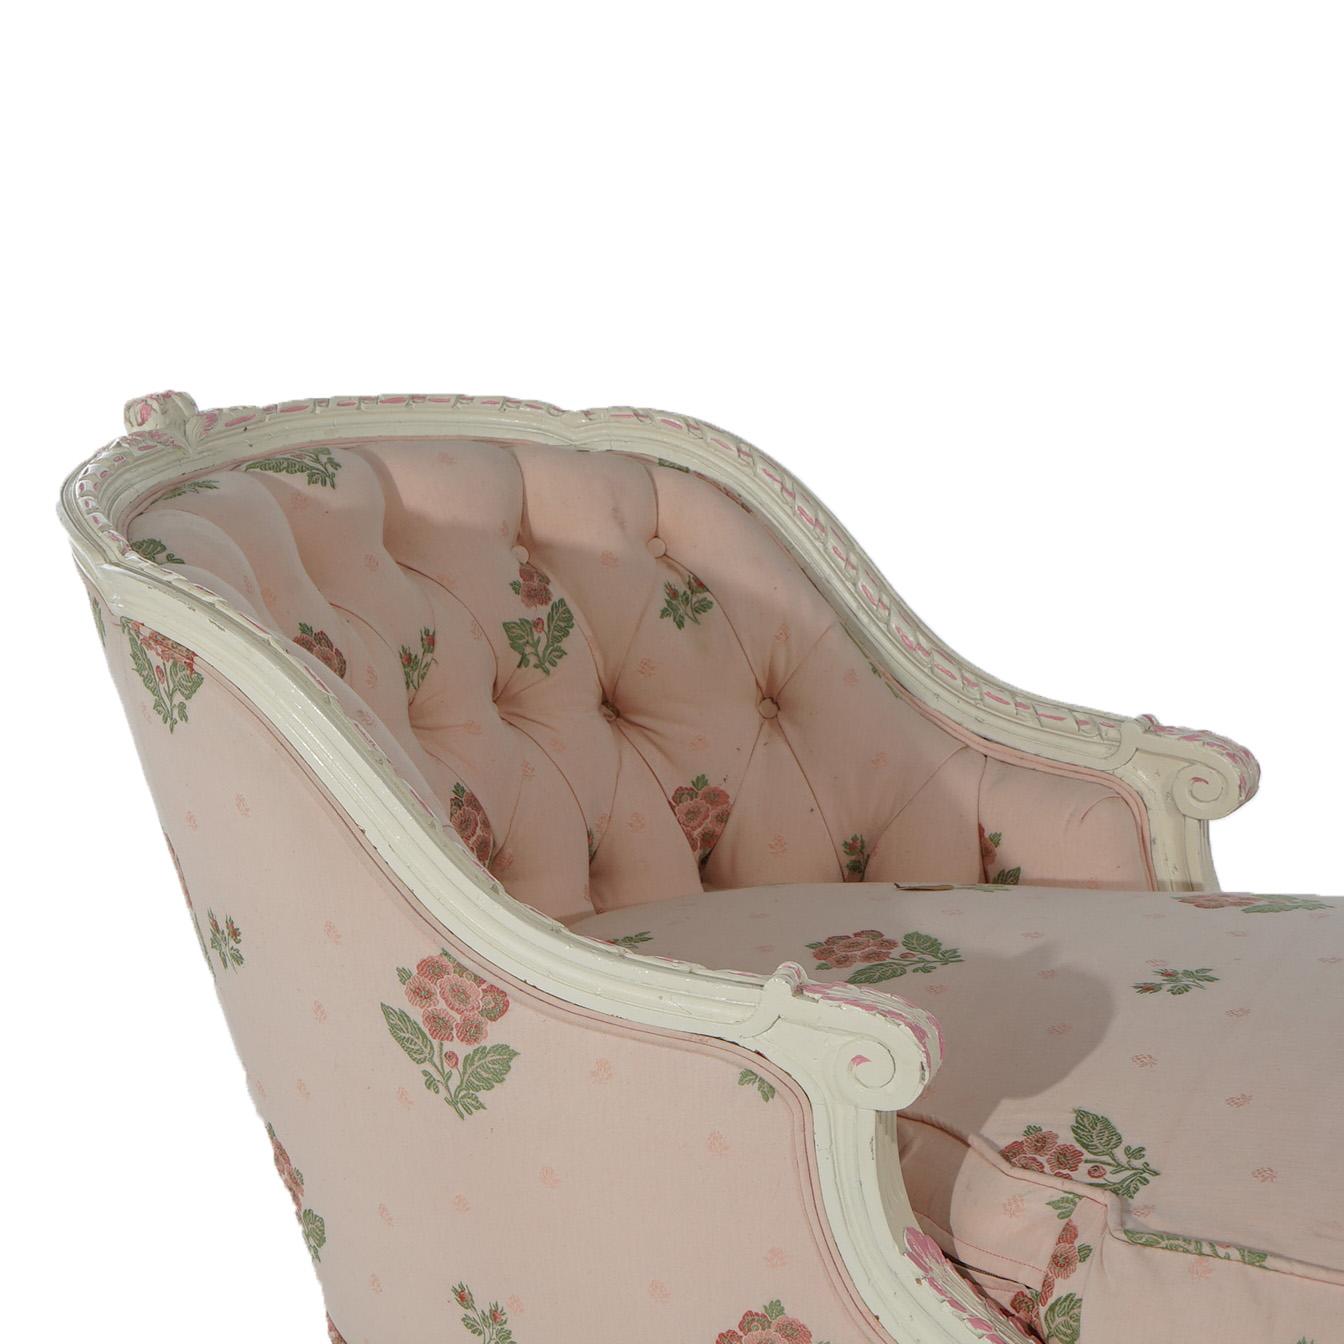 Upholstery Antique French Louis XVI Style Polychromed Recamier Chaise Lounge C1930 For Sale